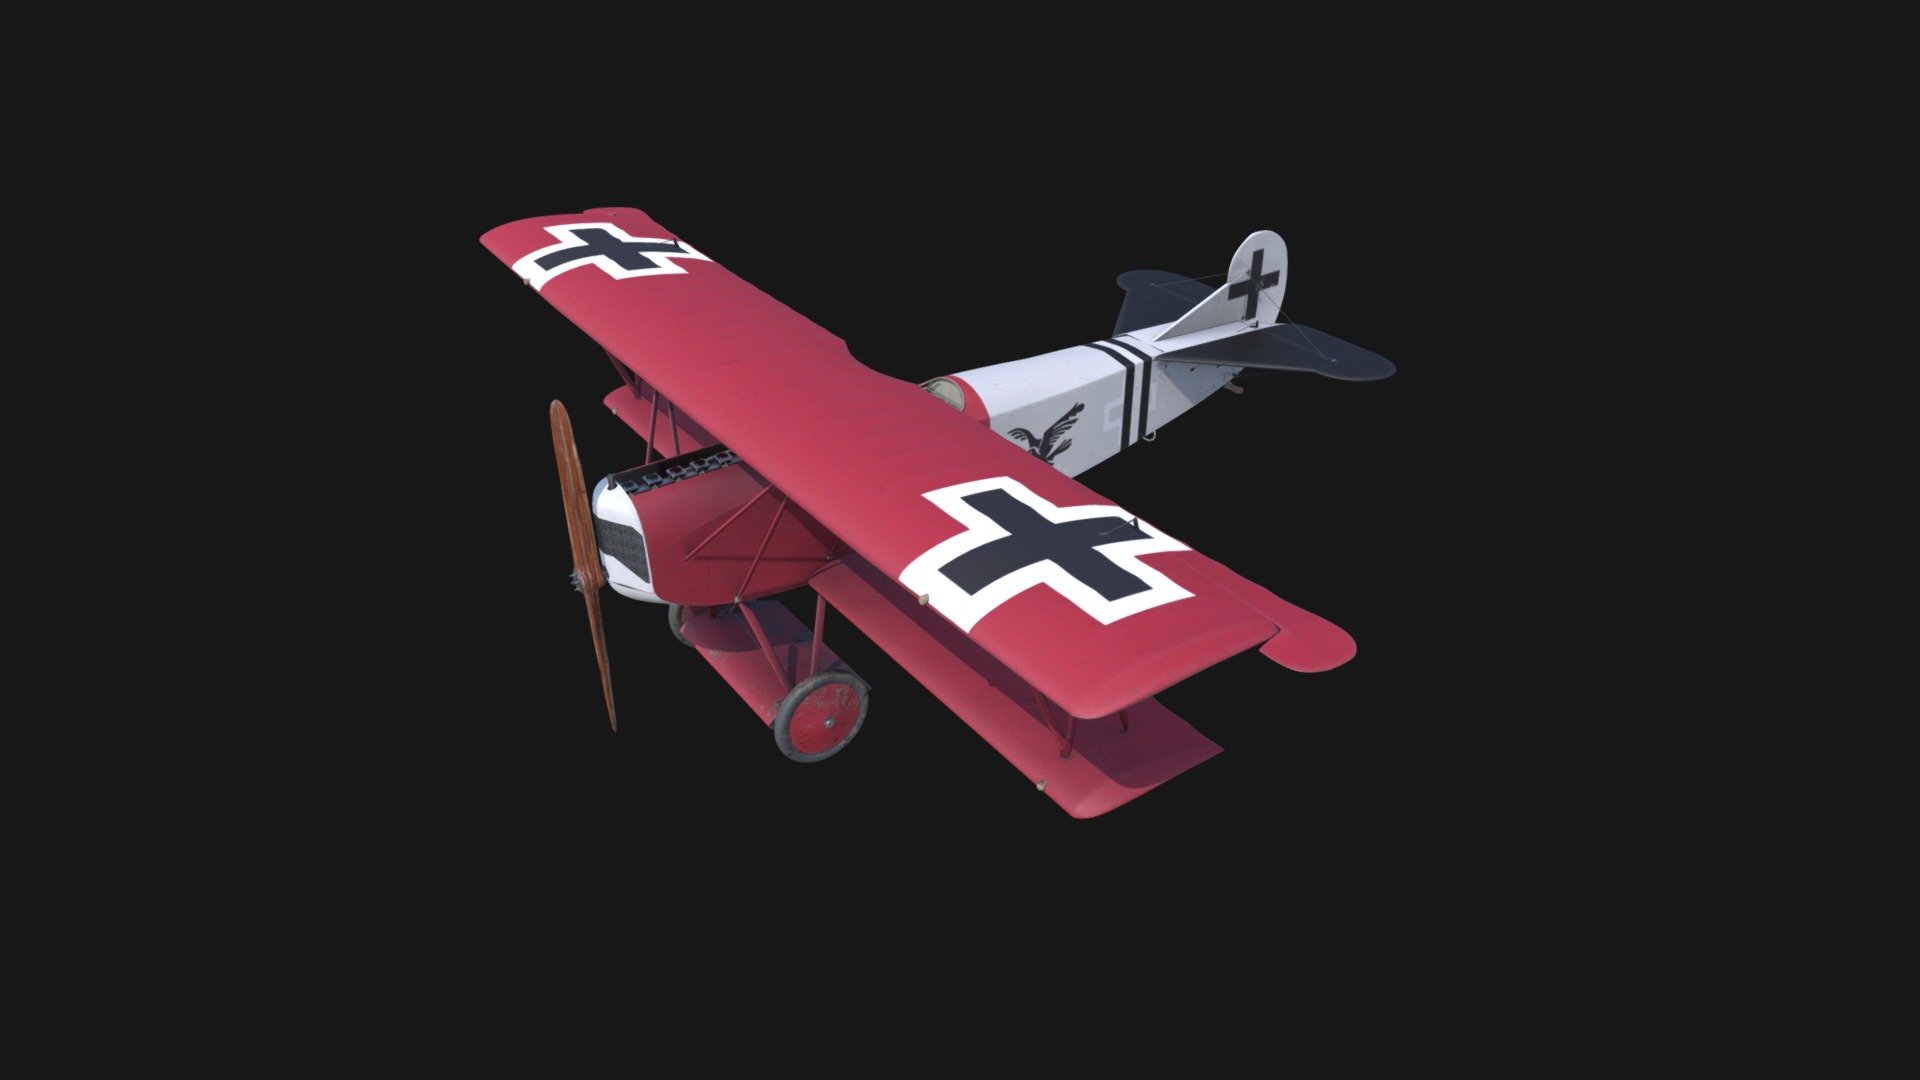 The Fokker D.VII was a German World War I fighter aircraft designed by Reinhold Platz of the Fokker-Flugzeugwerke. Germany produced around 3,300 D.VII aircraft in the second half of 1918. In service with the Luftstreitkräfte, the D.VII quickly proved itself to be a formidable aircraft. The Armistice ending the war specifically required, as the fourth clause of the &ldquo;Clauses Relating to the Western Front